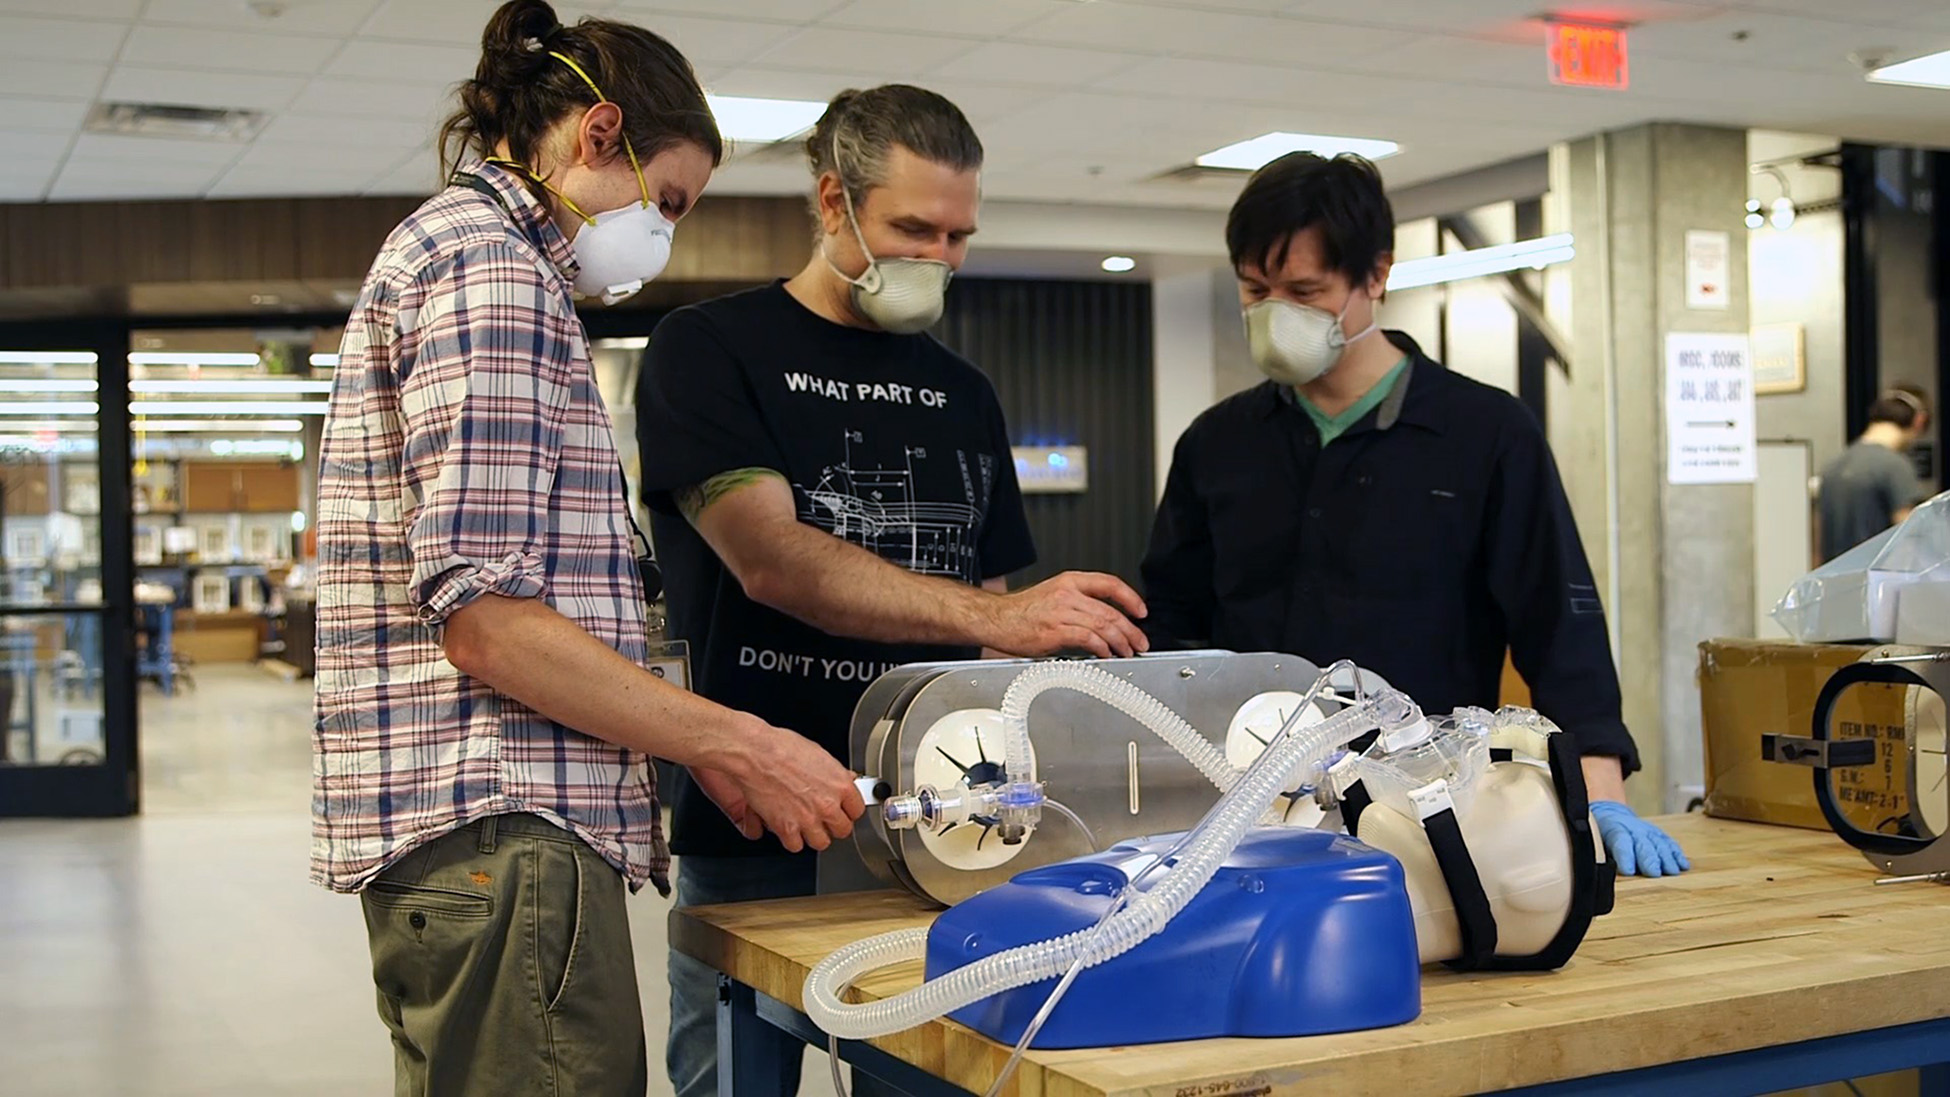 Researchers evaluate operation of a simple, low-cost ventilator based on the resuscitation bags carried in ambulances. (Credit: Steven Norris, Georgia Tech)